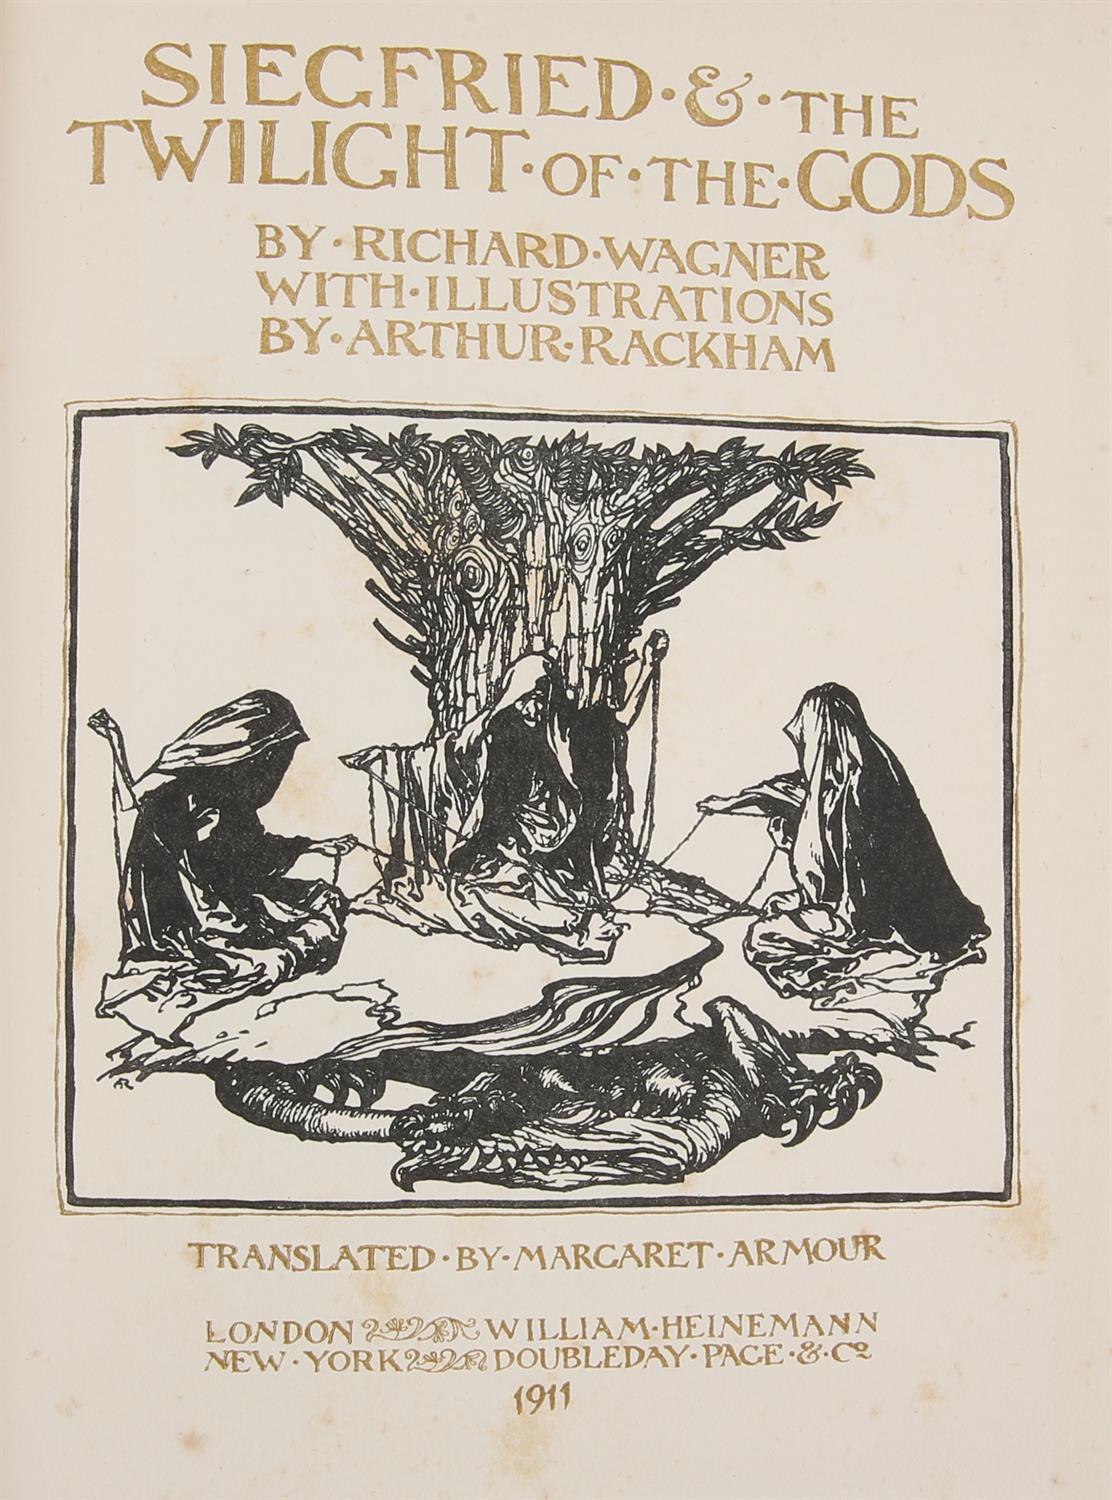 Rackham, Arthur, 'Siegfried and the Twilight of the Gods' by Richard Wagner, translated by Margaret - Image 4 of 5